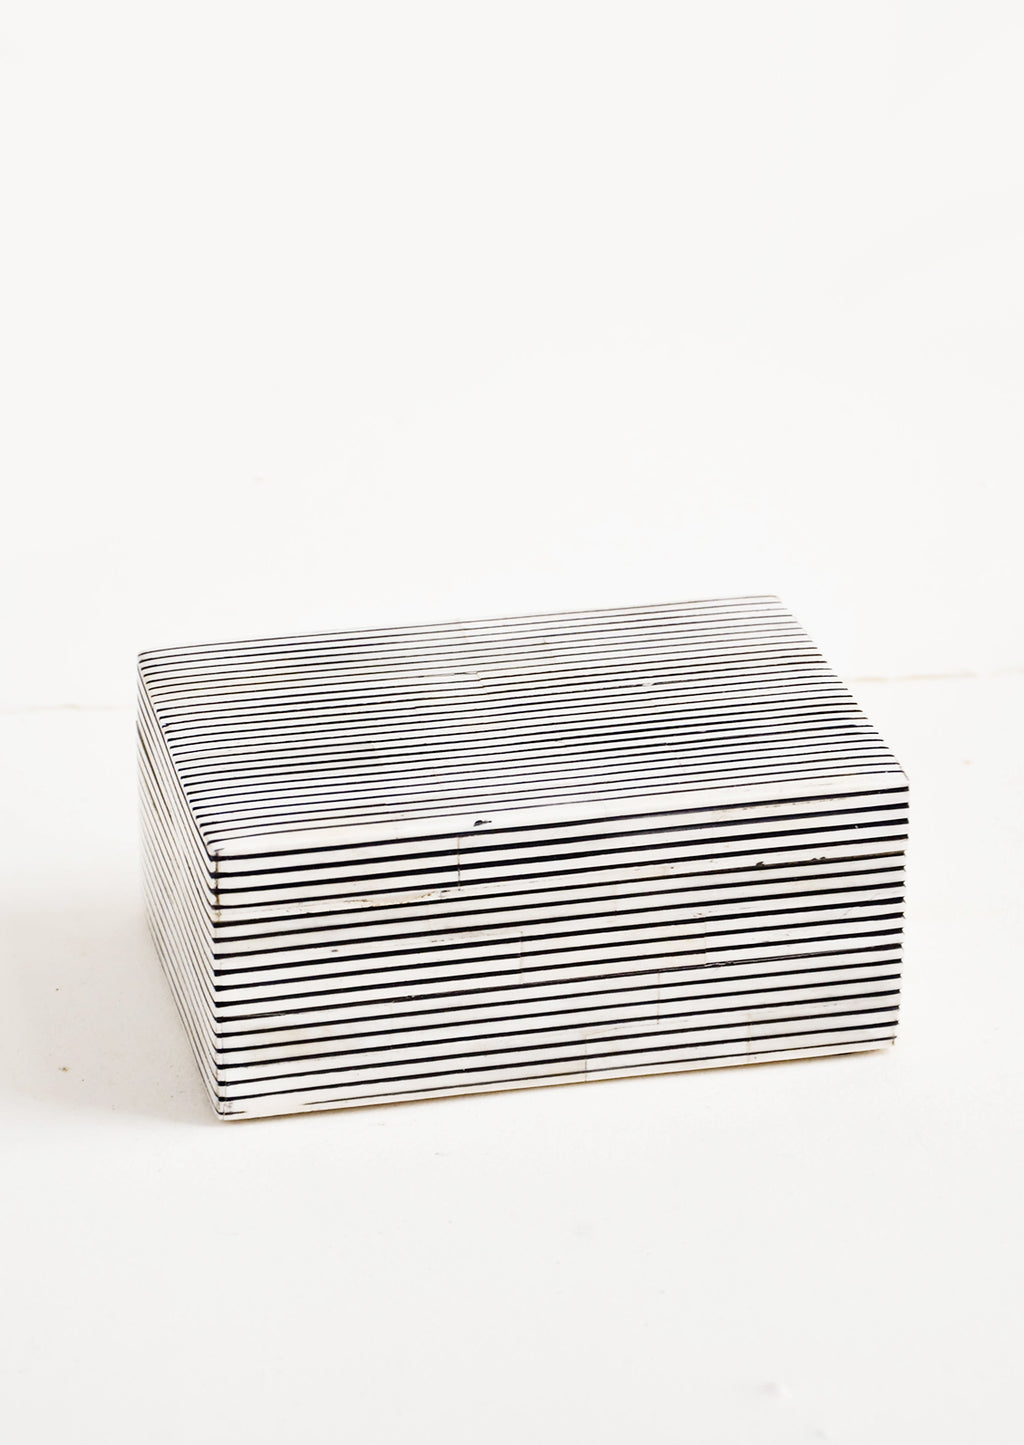 Small: Small lidded storage box made from black & white striped bone